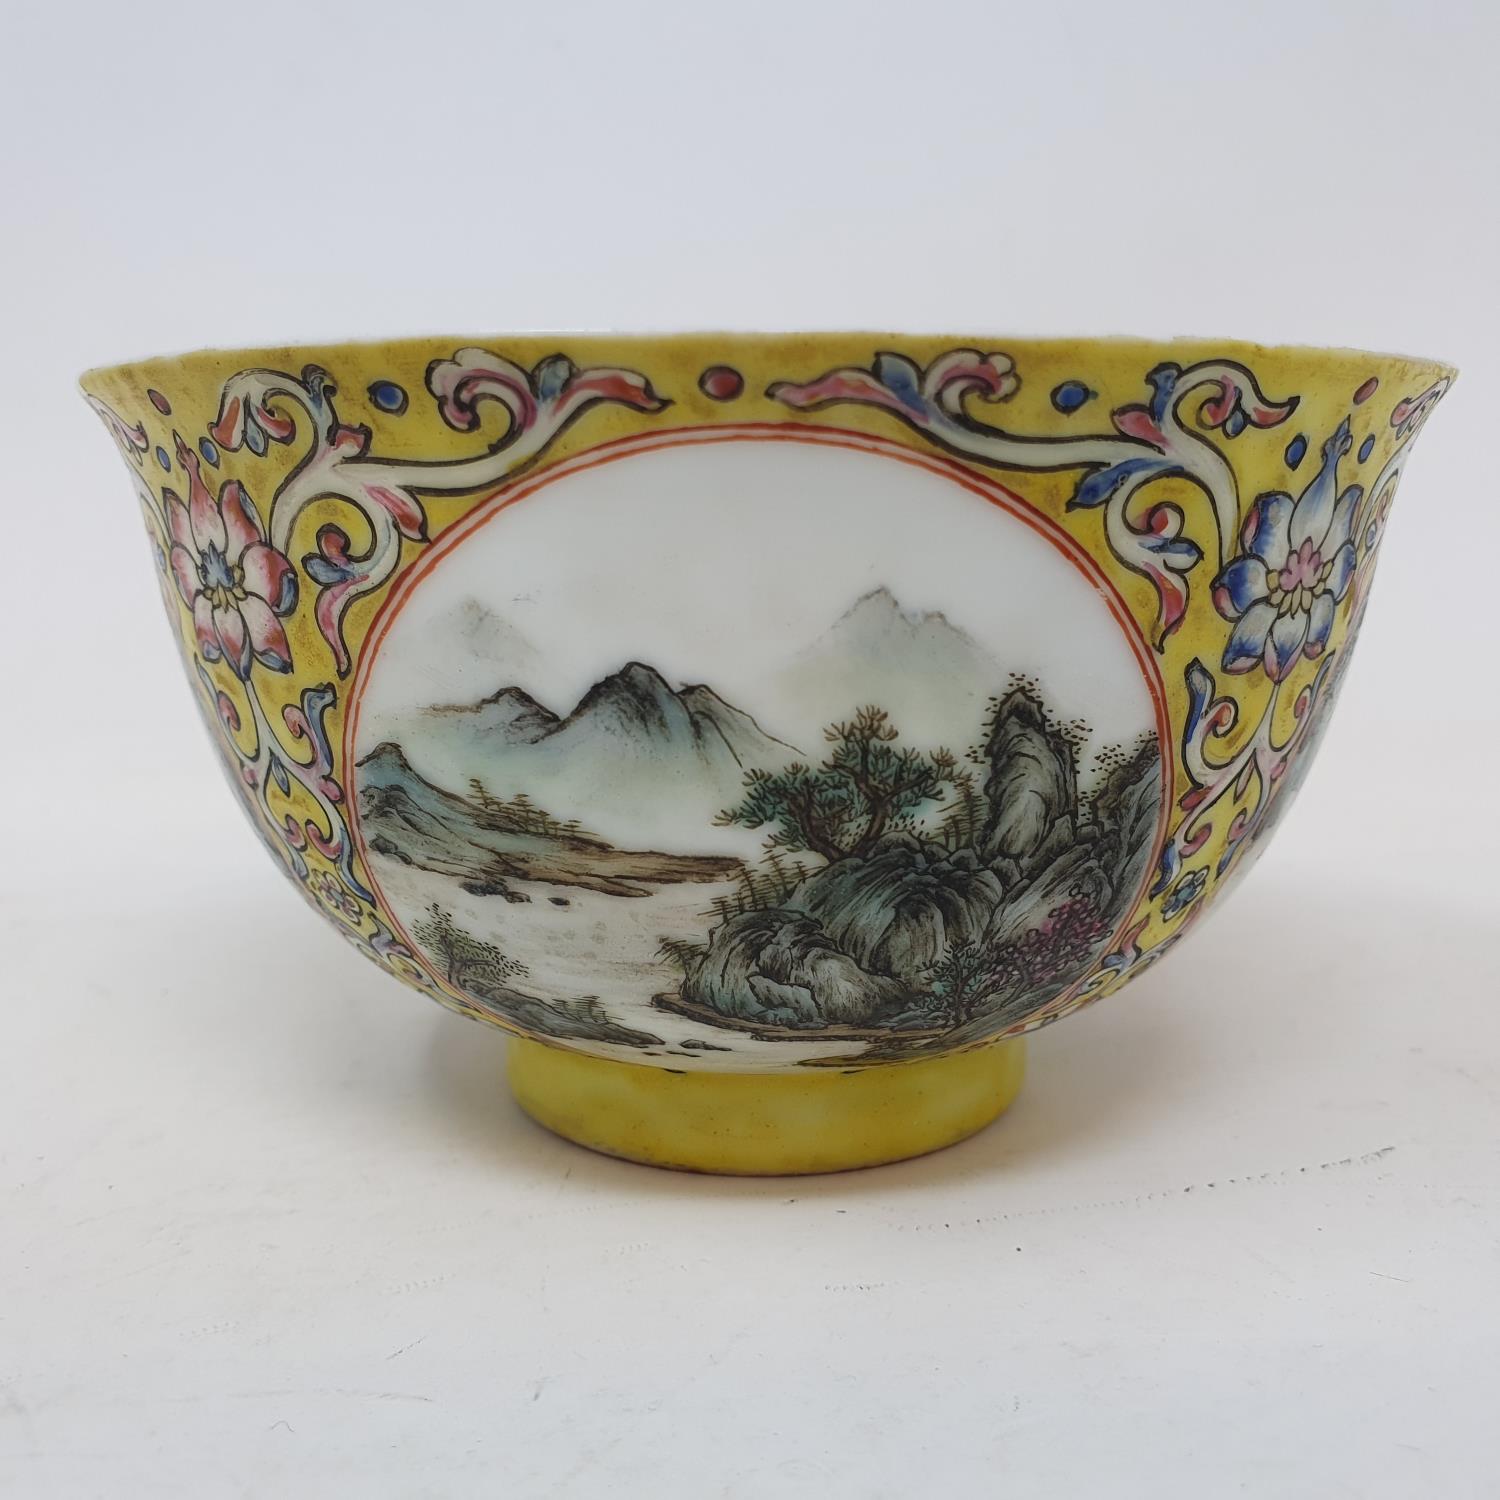 A Chinese porcelain medallion bowl, decorated vignettes of mountain scenes on a yelllow ground - Image 3 of 6